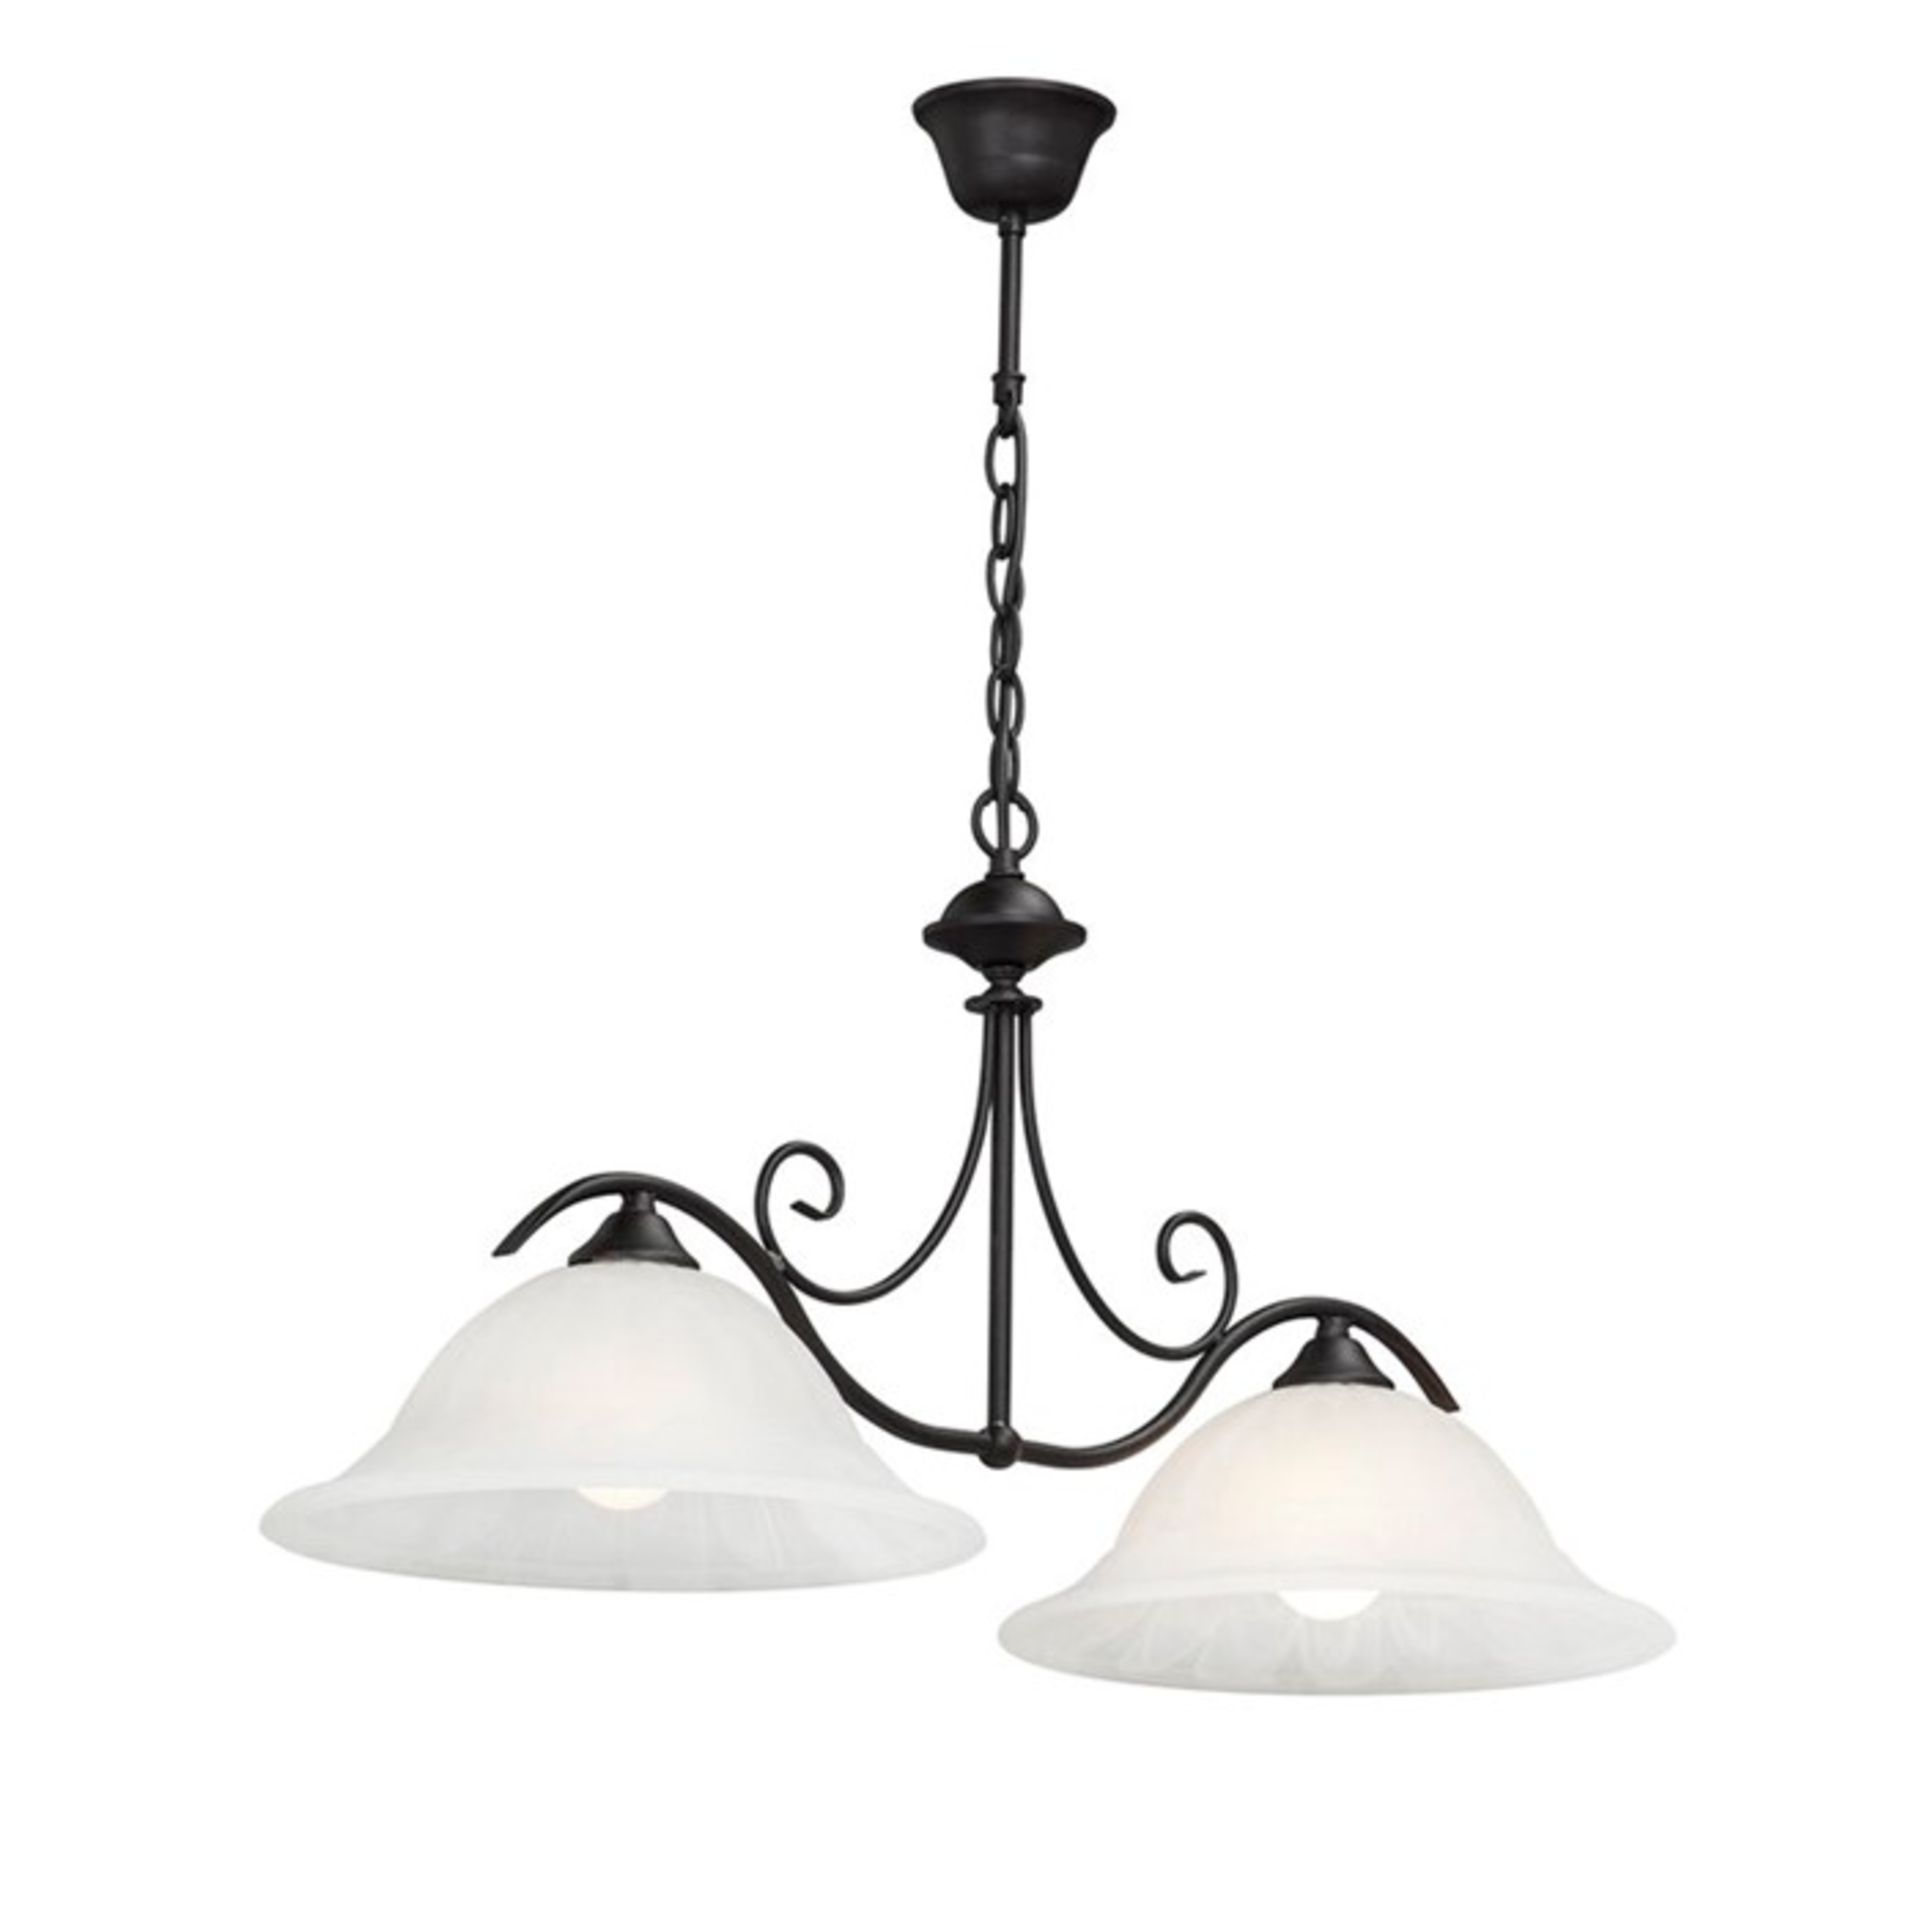 Marlow Home Co. Crestshire 2-Light Shaded Chandeli